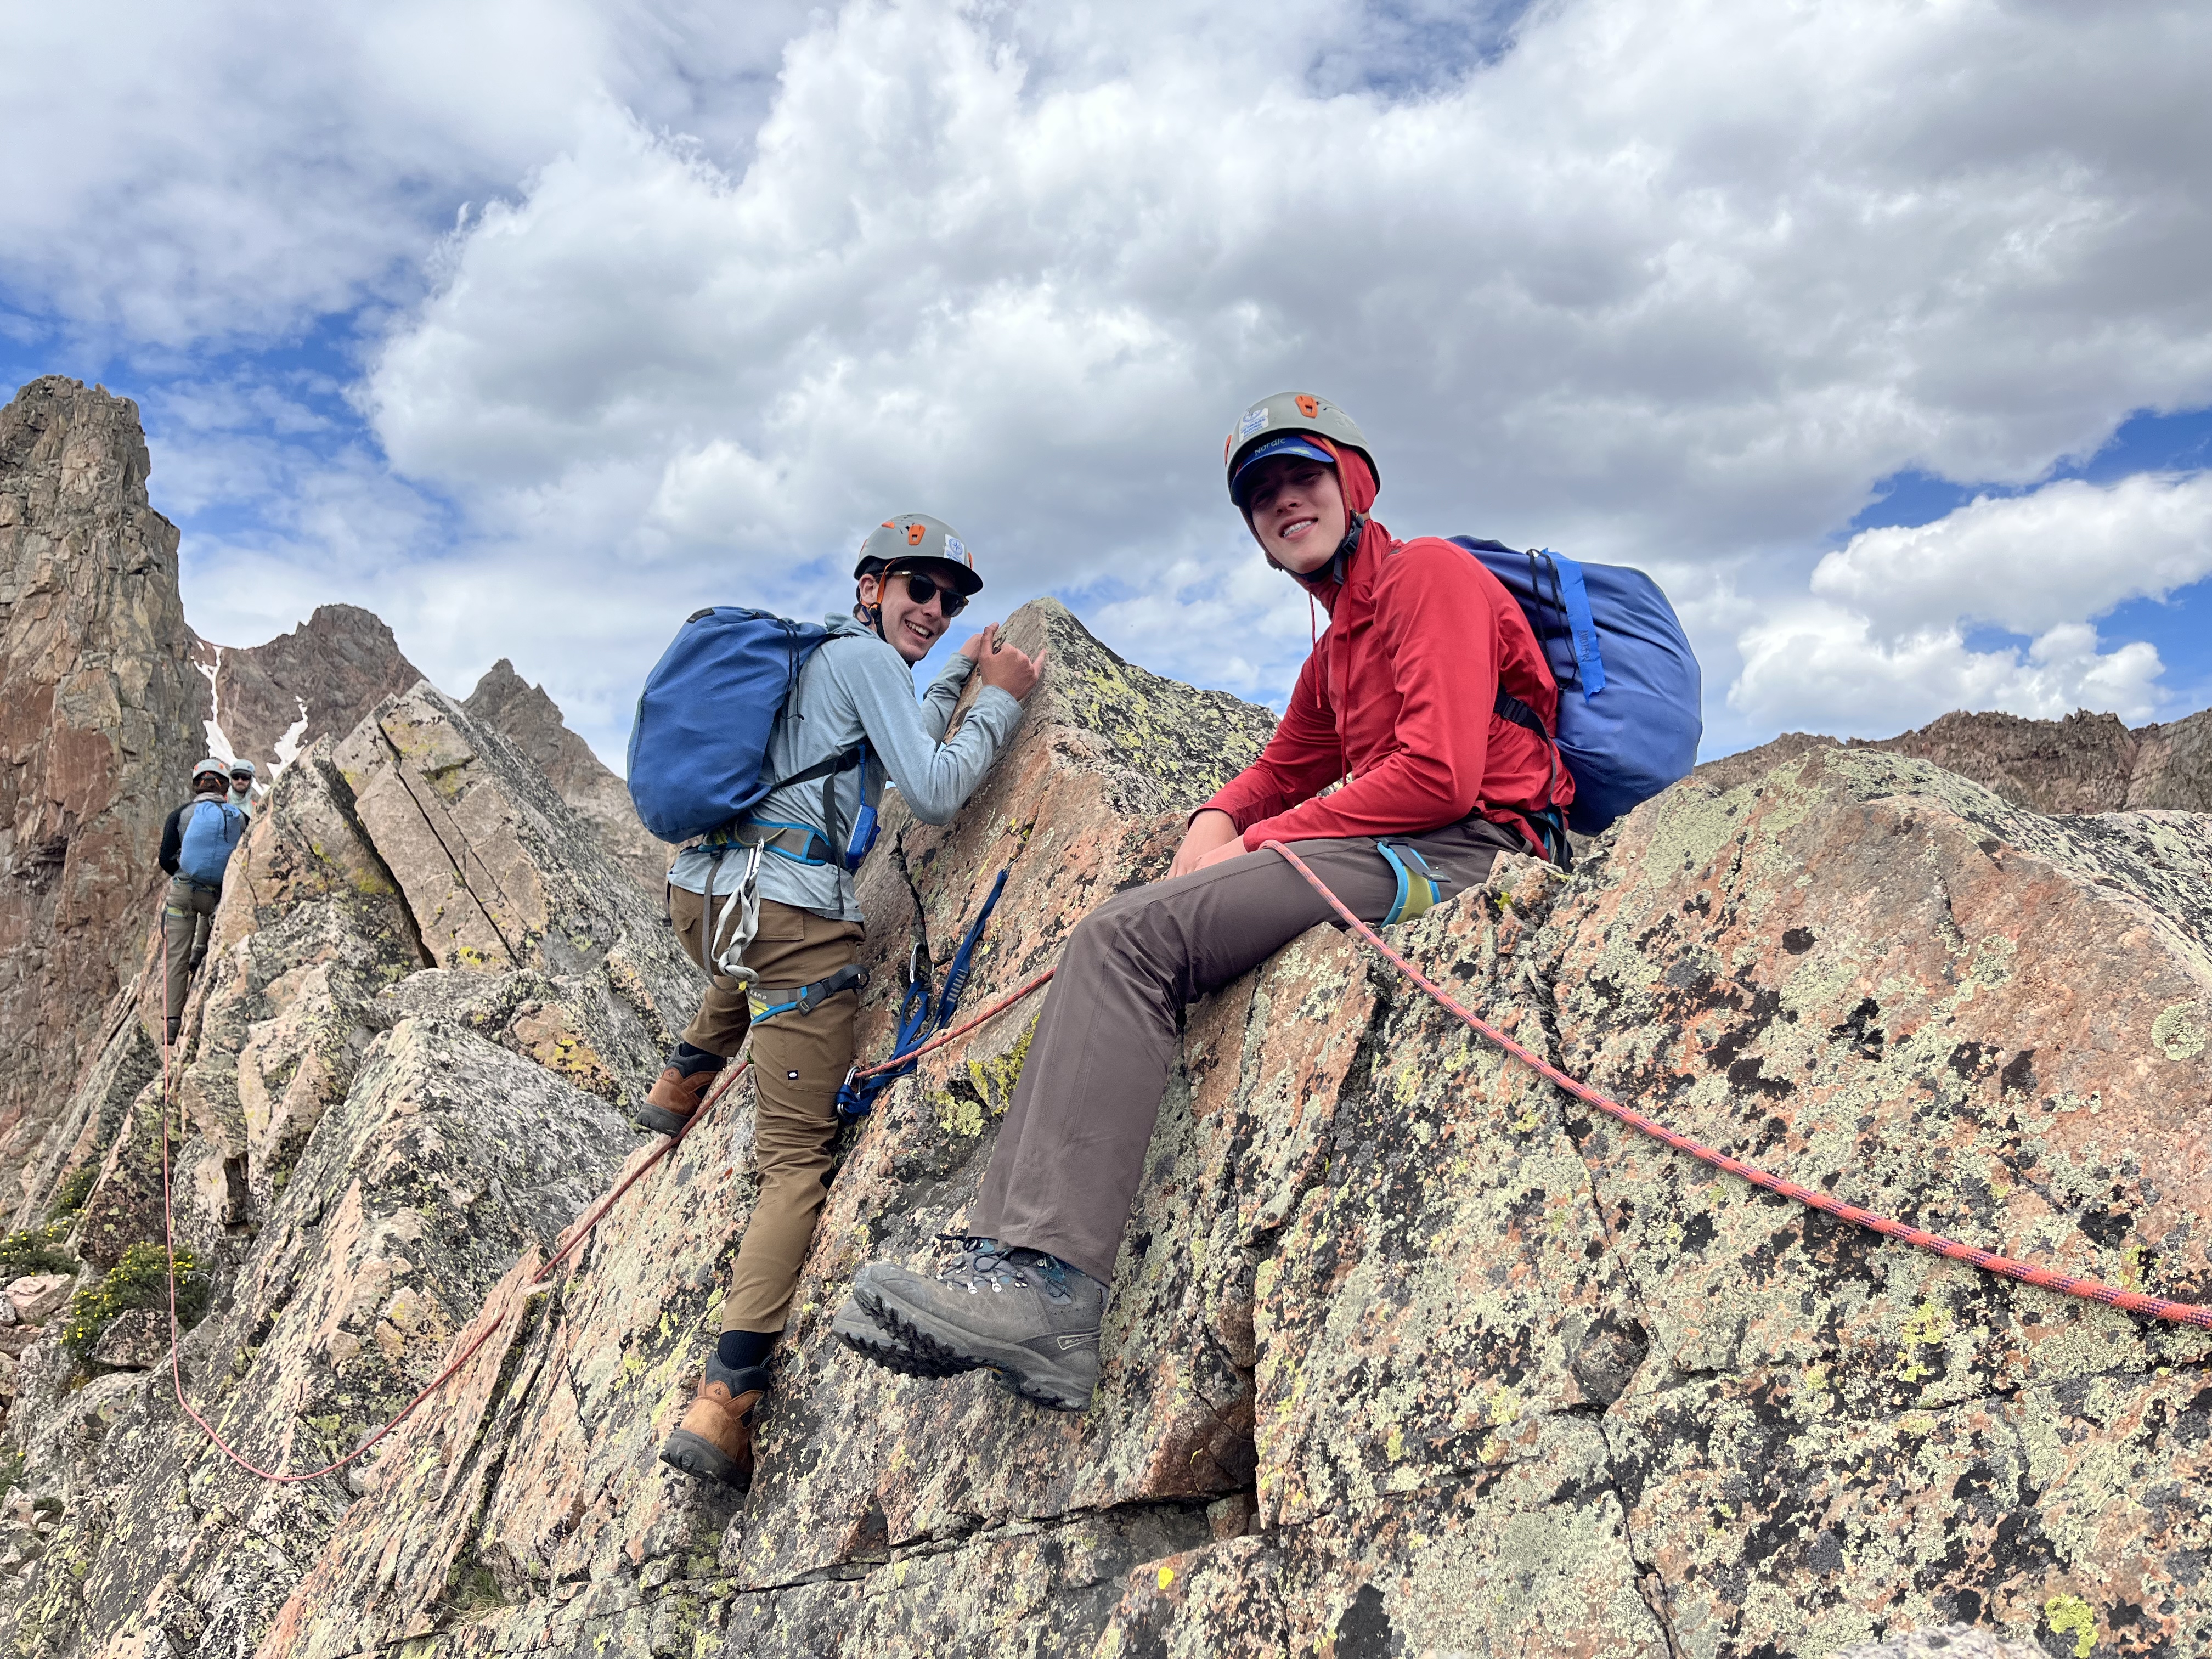 Students Mountaineering in the Colorado Rockies